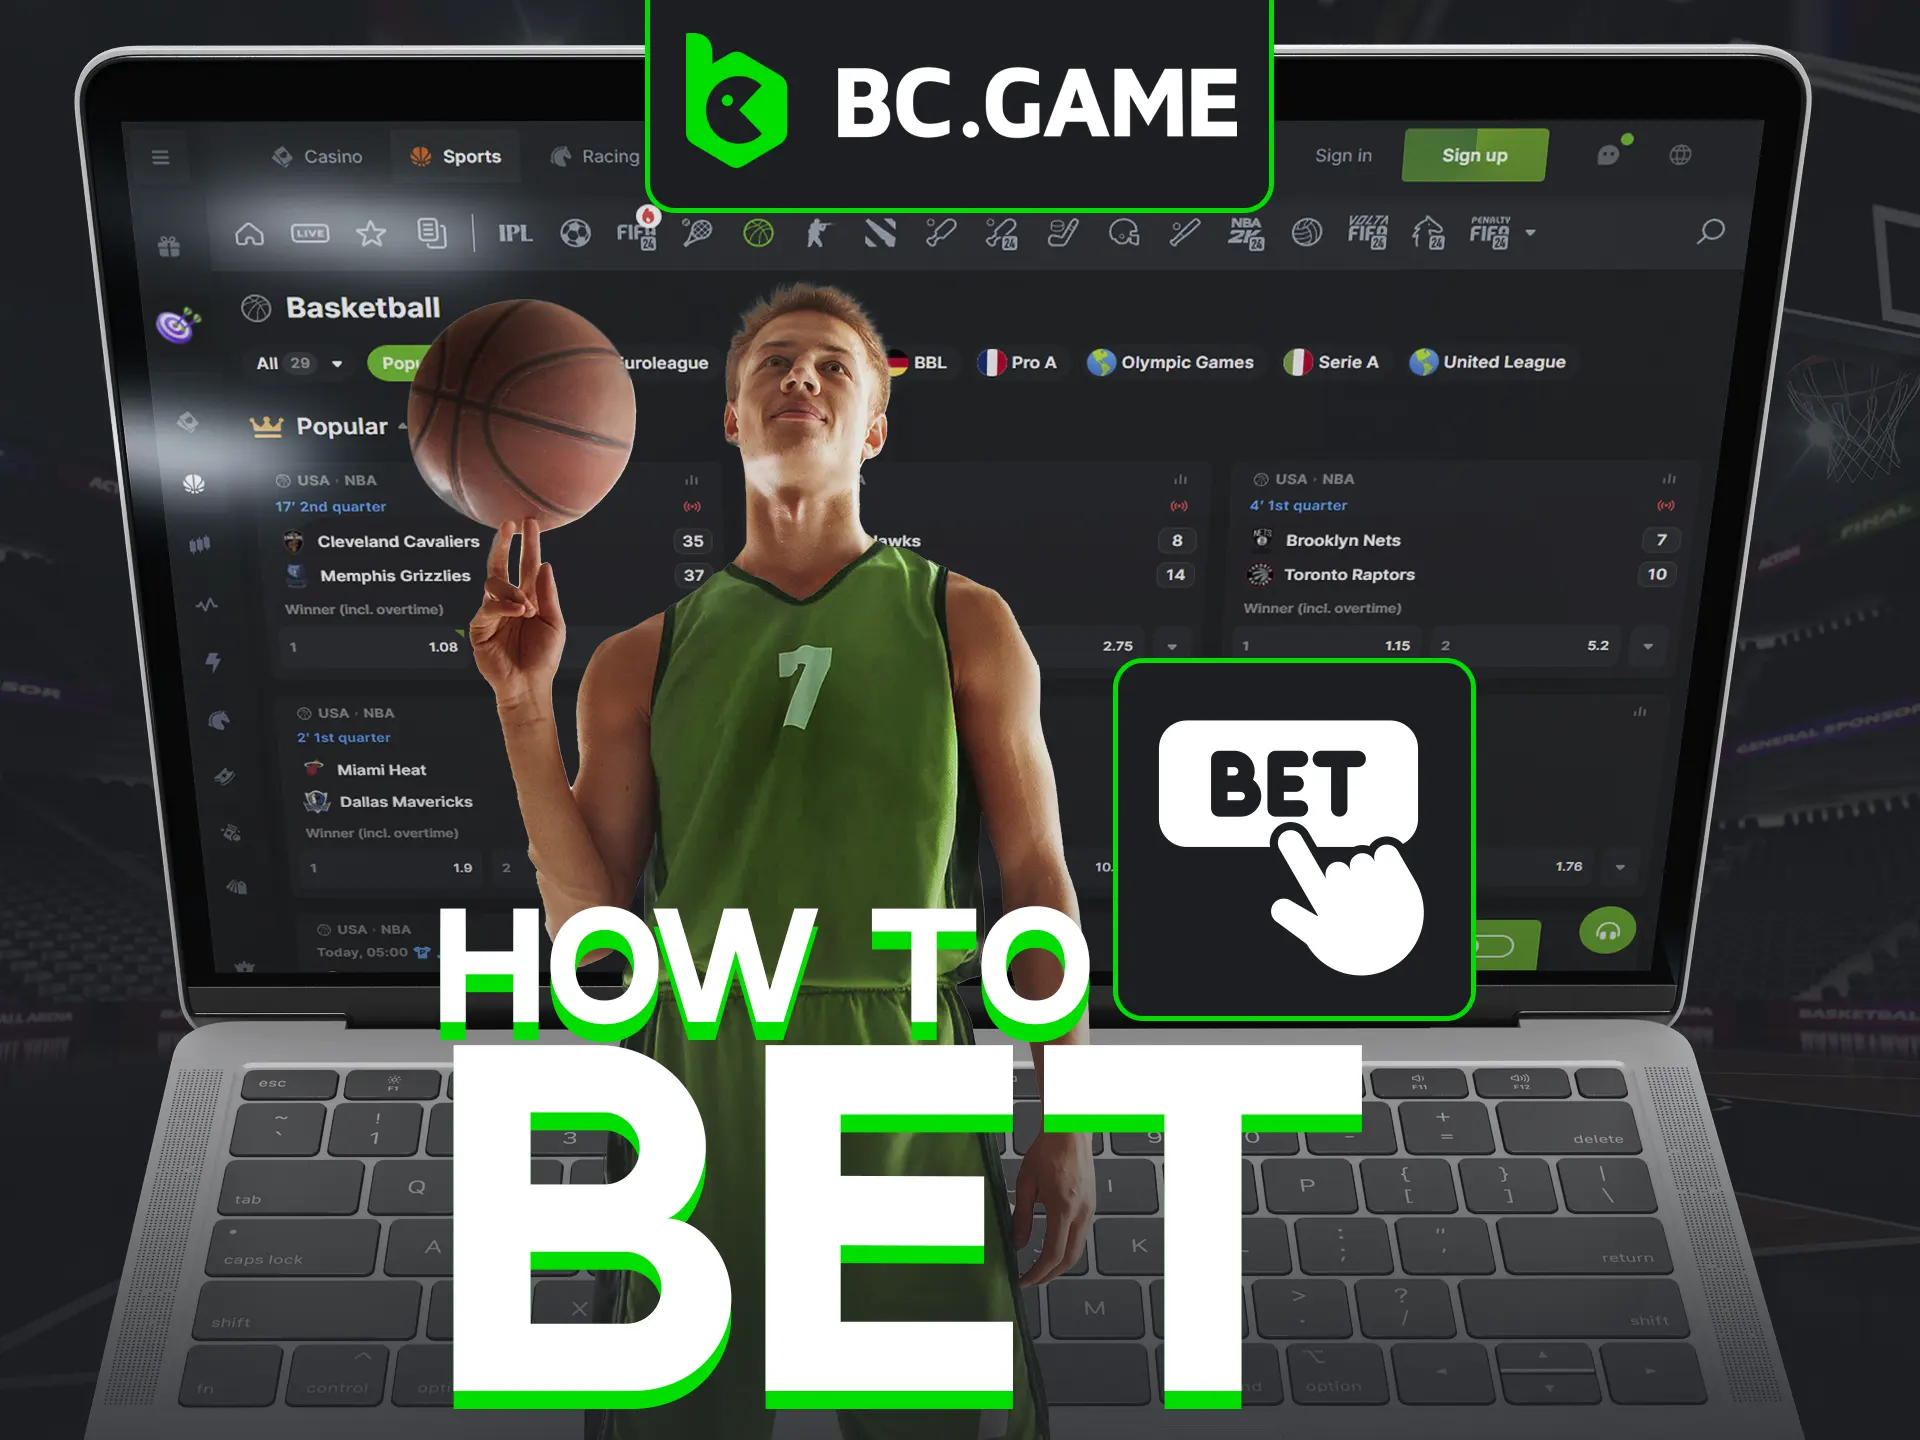 Bet on basketball easily at BC Game with these simple steps.